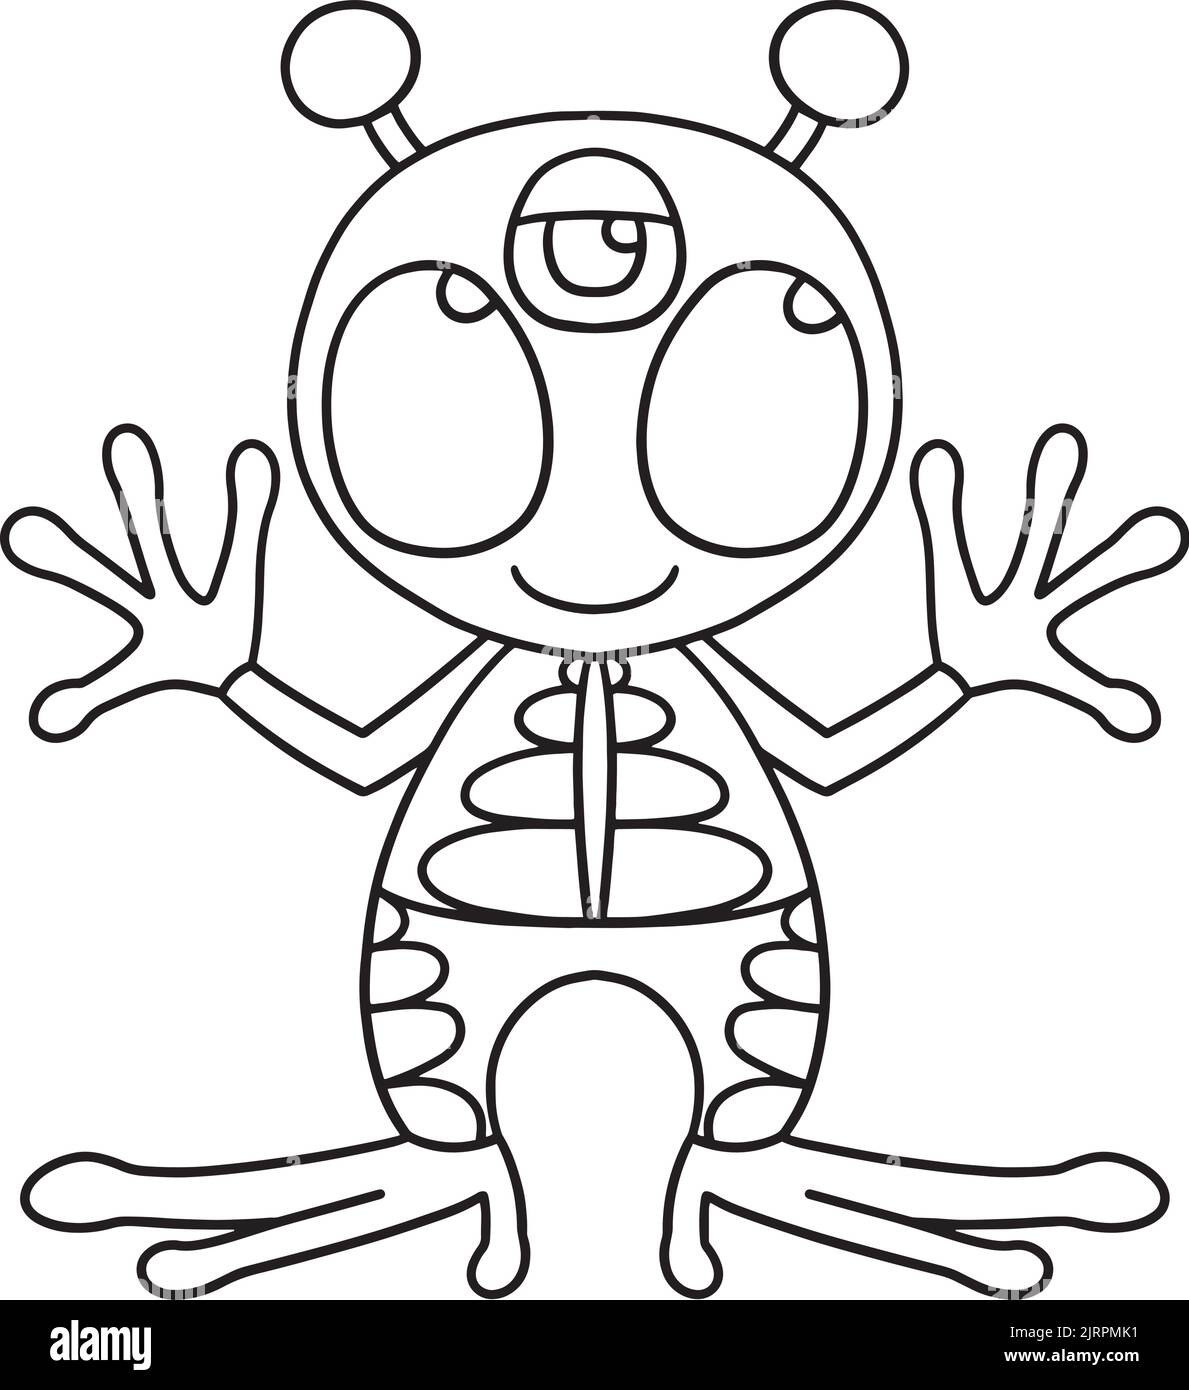 UFO Alien Space Isolated Coloring Page für Kinder Stock Vektor